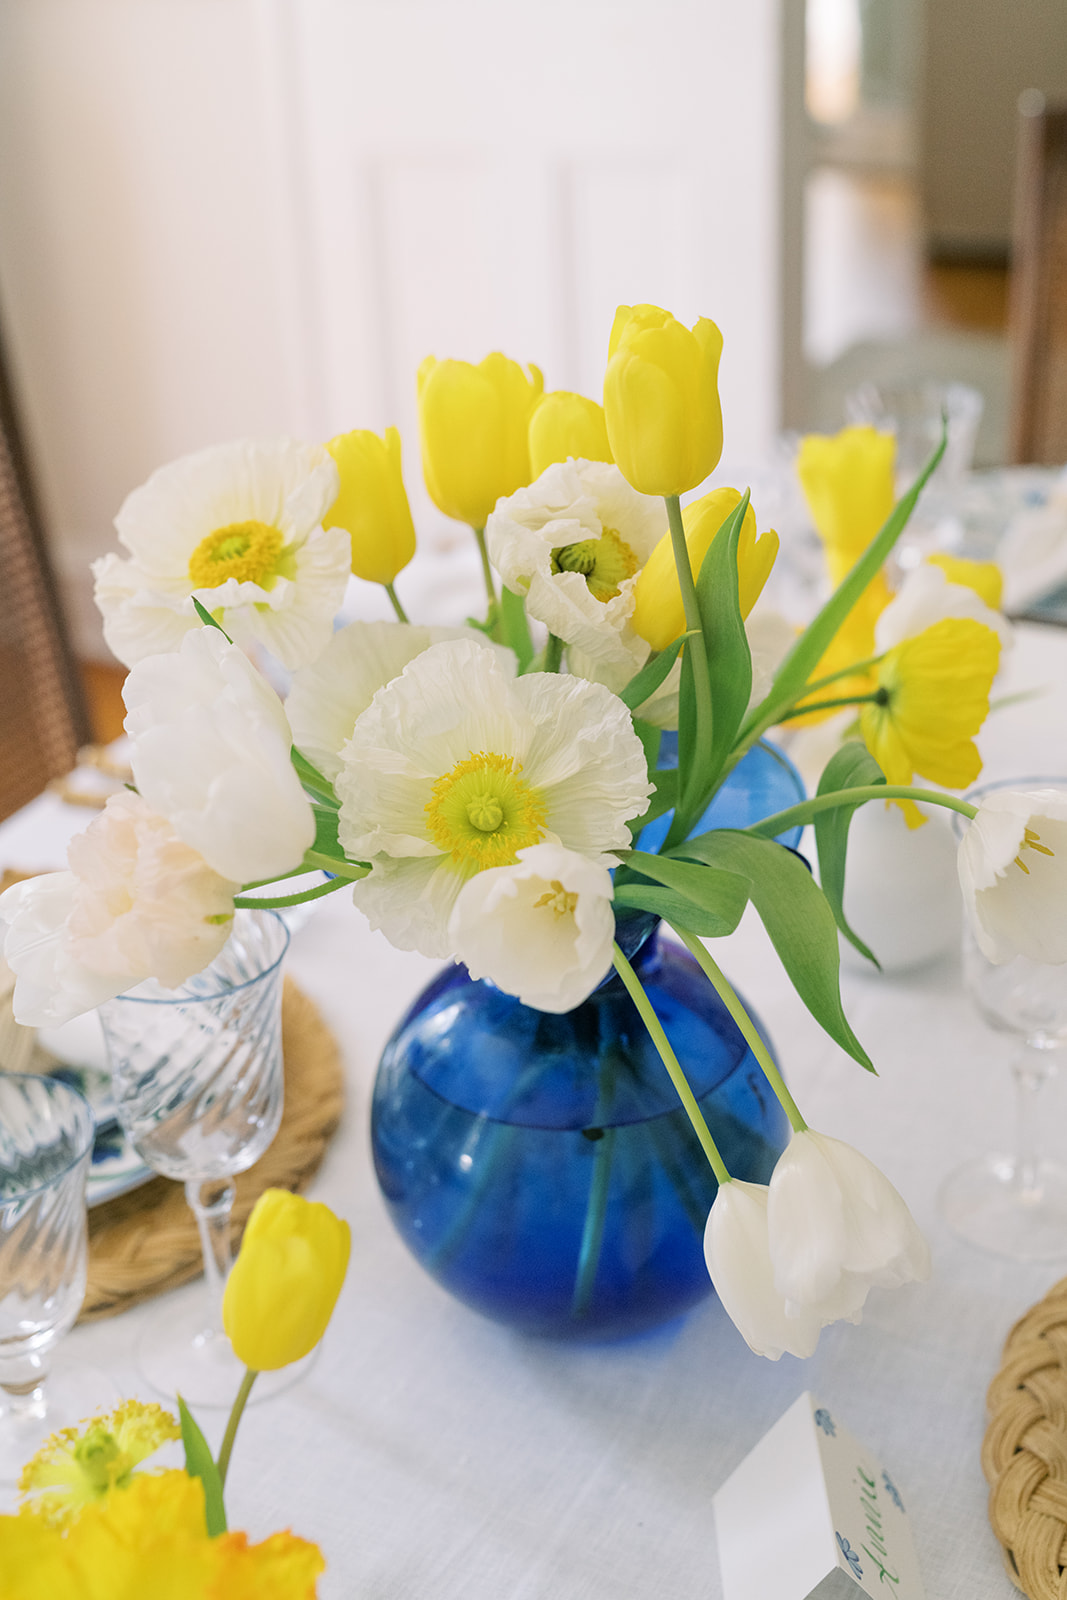 fresh flowers tablescape, fresh flowers on table, lunch tablescape with fresh flowers, springtime table with fresh flowers